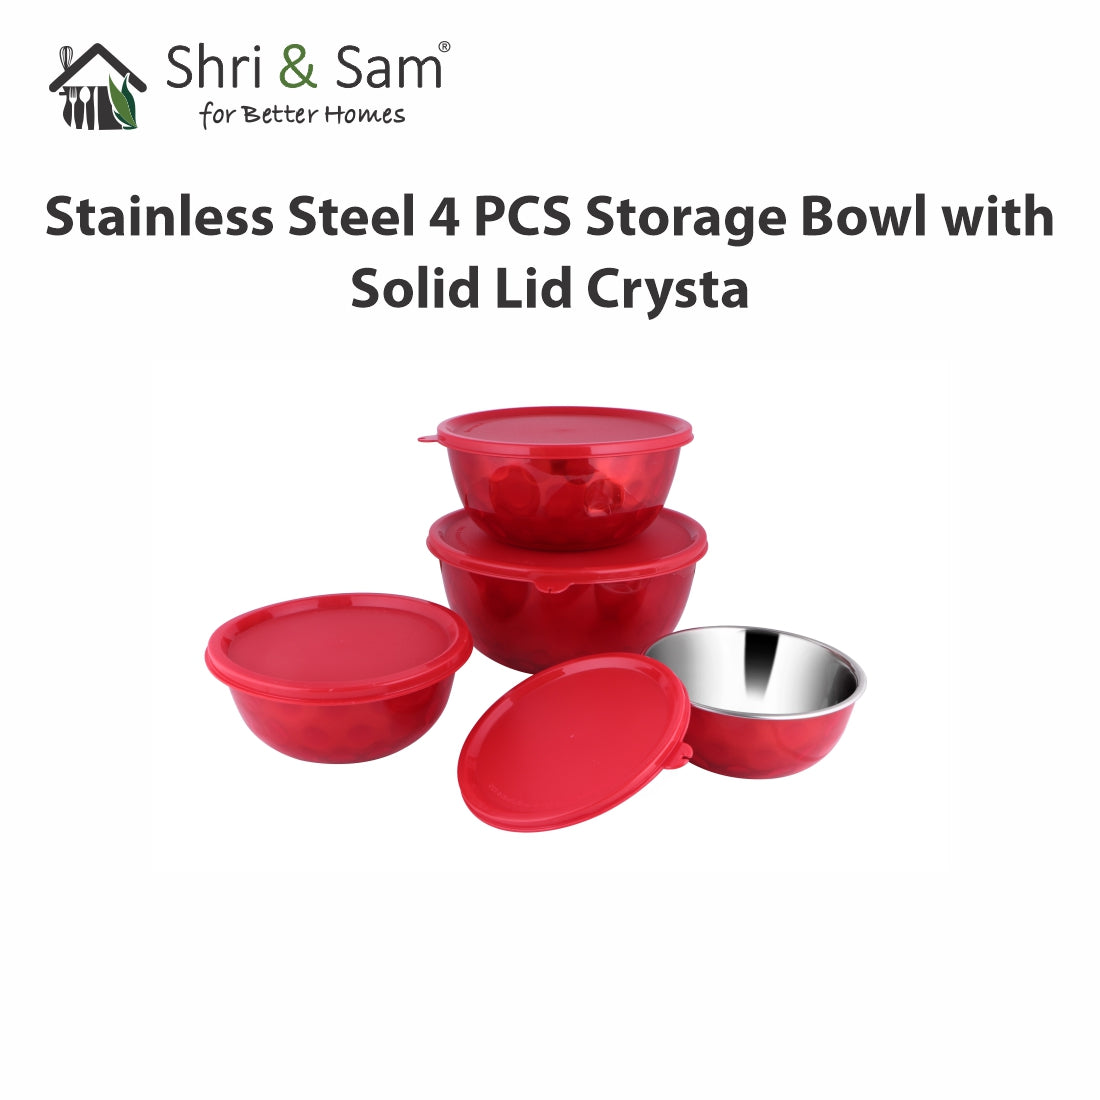 Stainless Steel 4 PCS Storage Bowl with Solid Lid Crysta